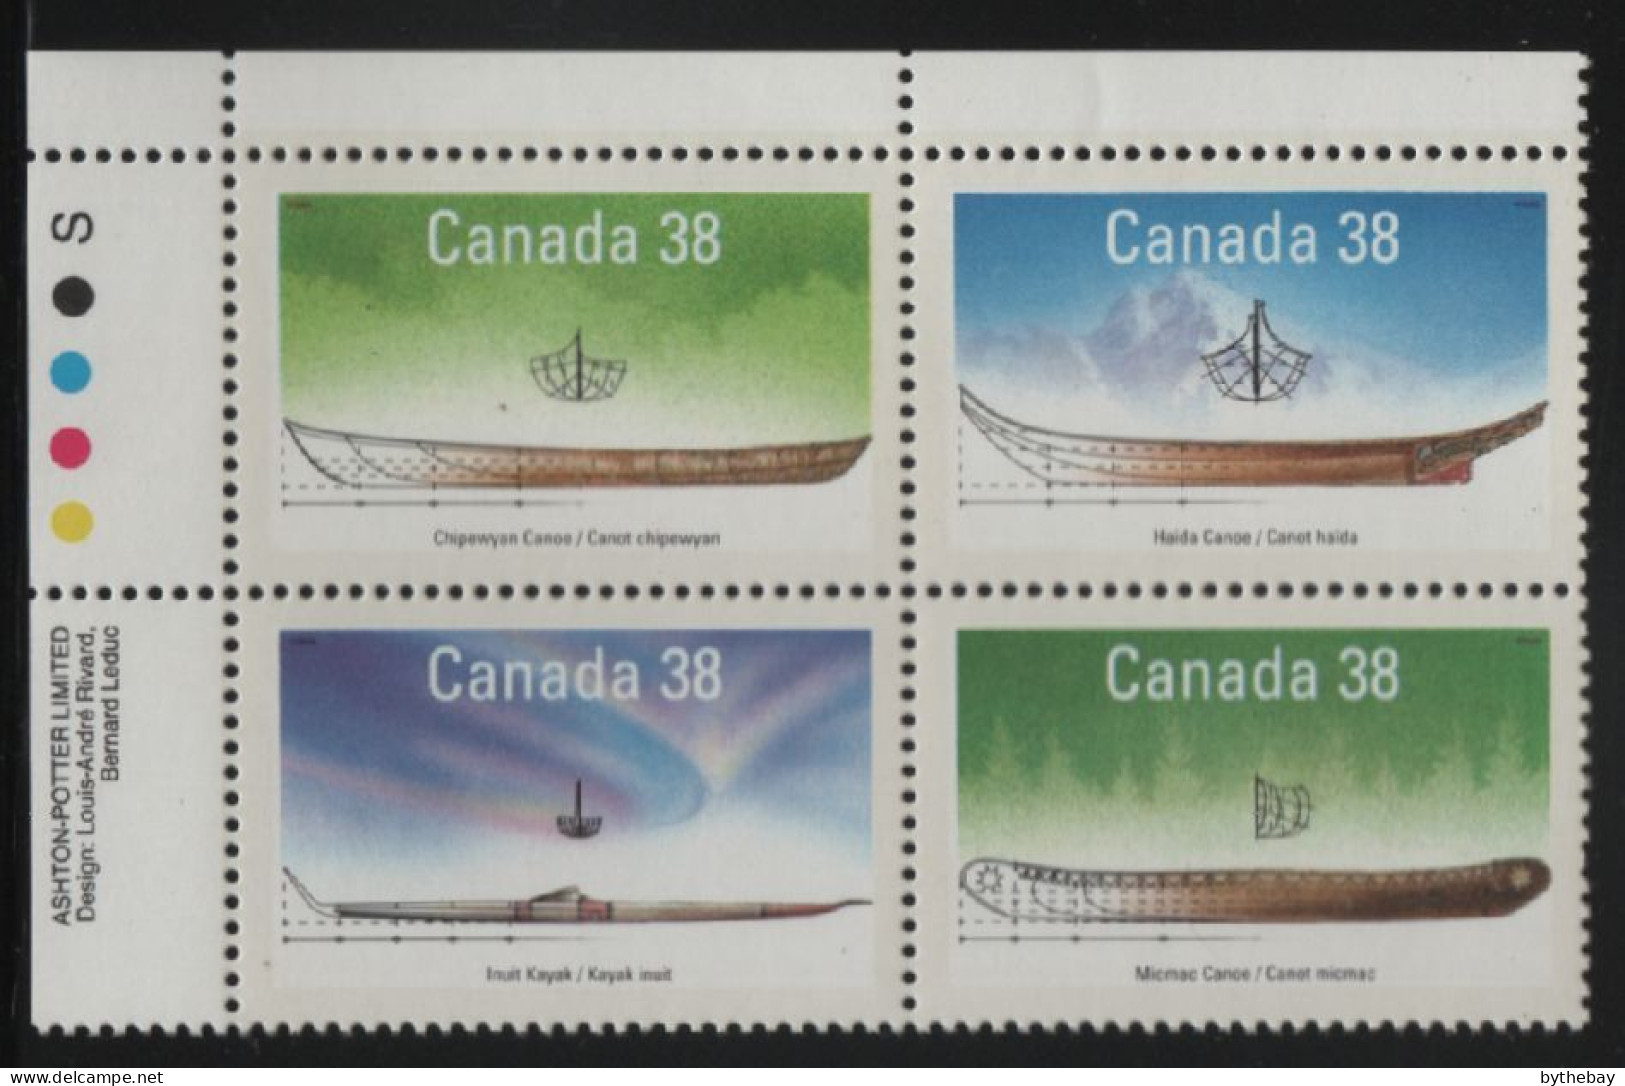 Canada 1989 MNH Sc 1232a 38c Native Boats UL Plate Block - Plate Number & Inscriptions